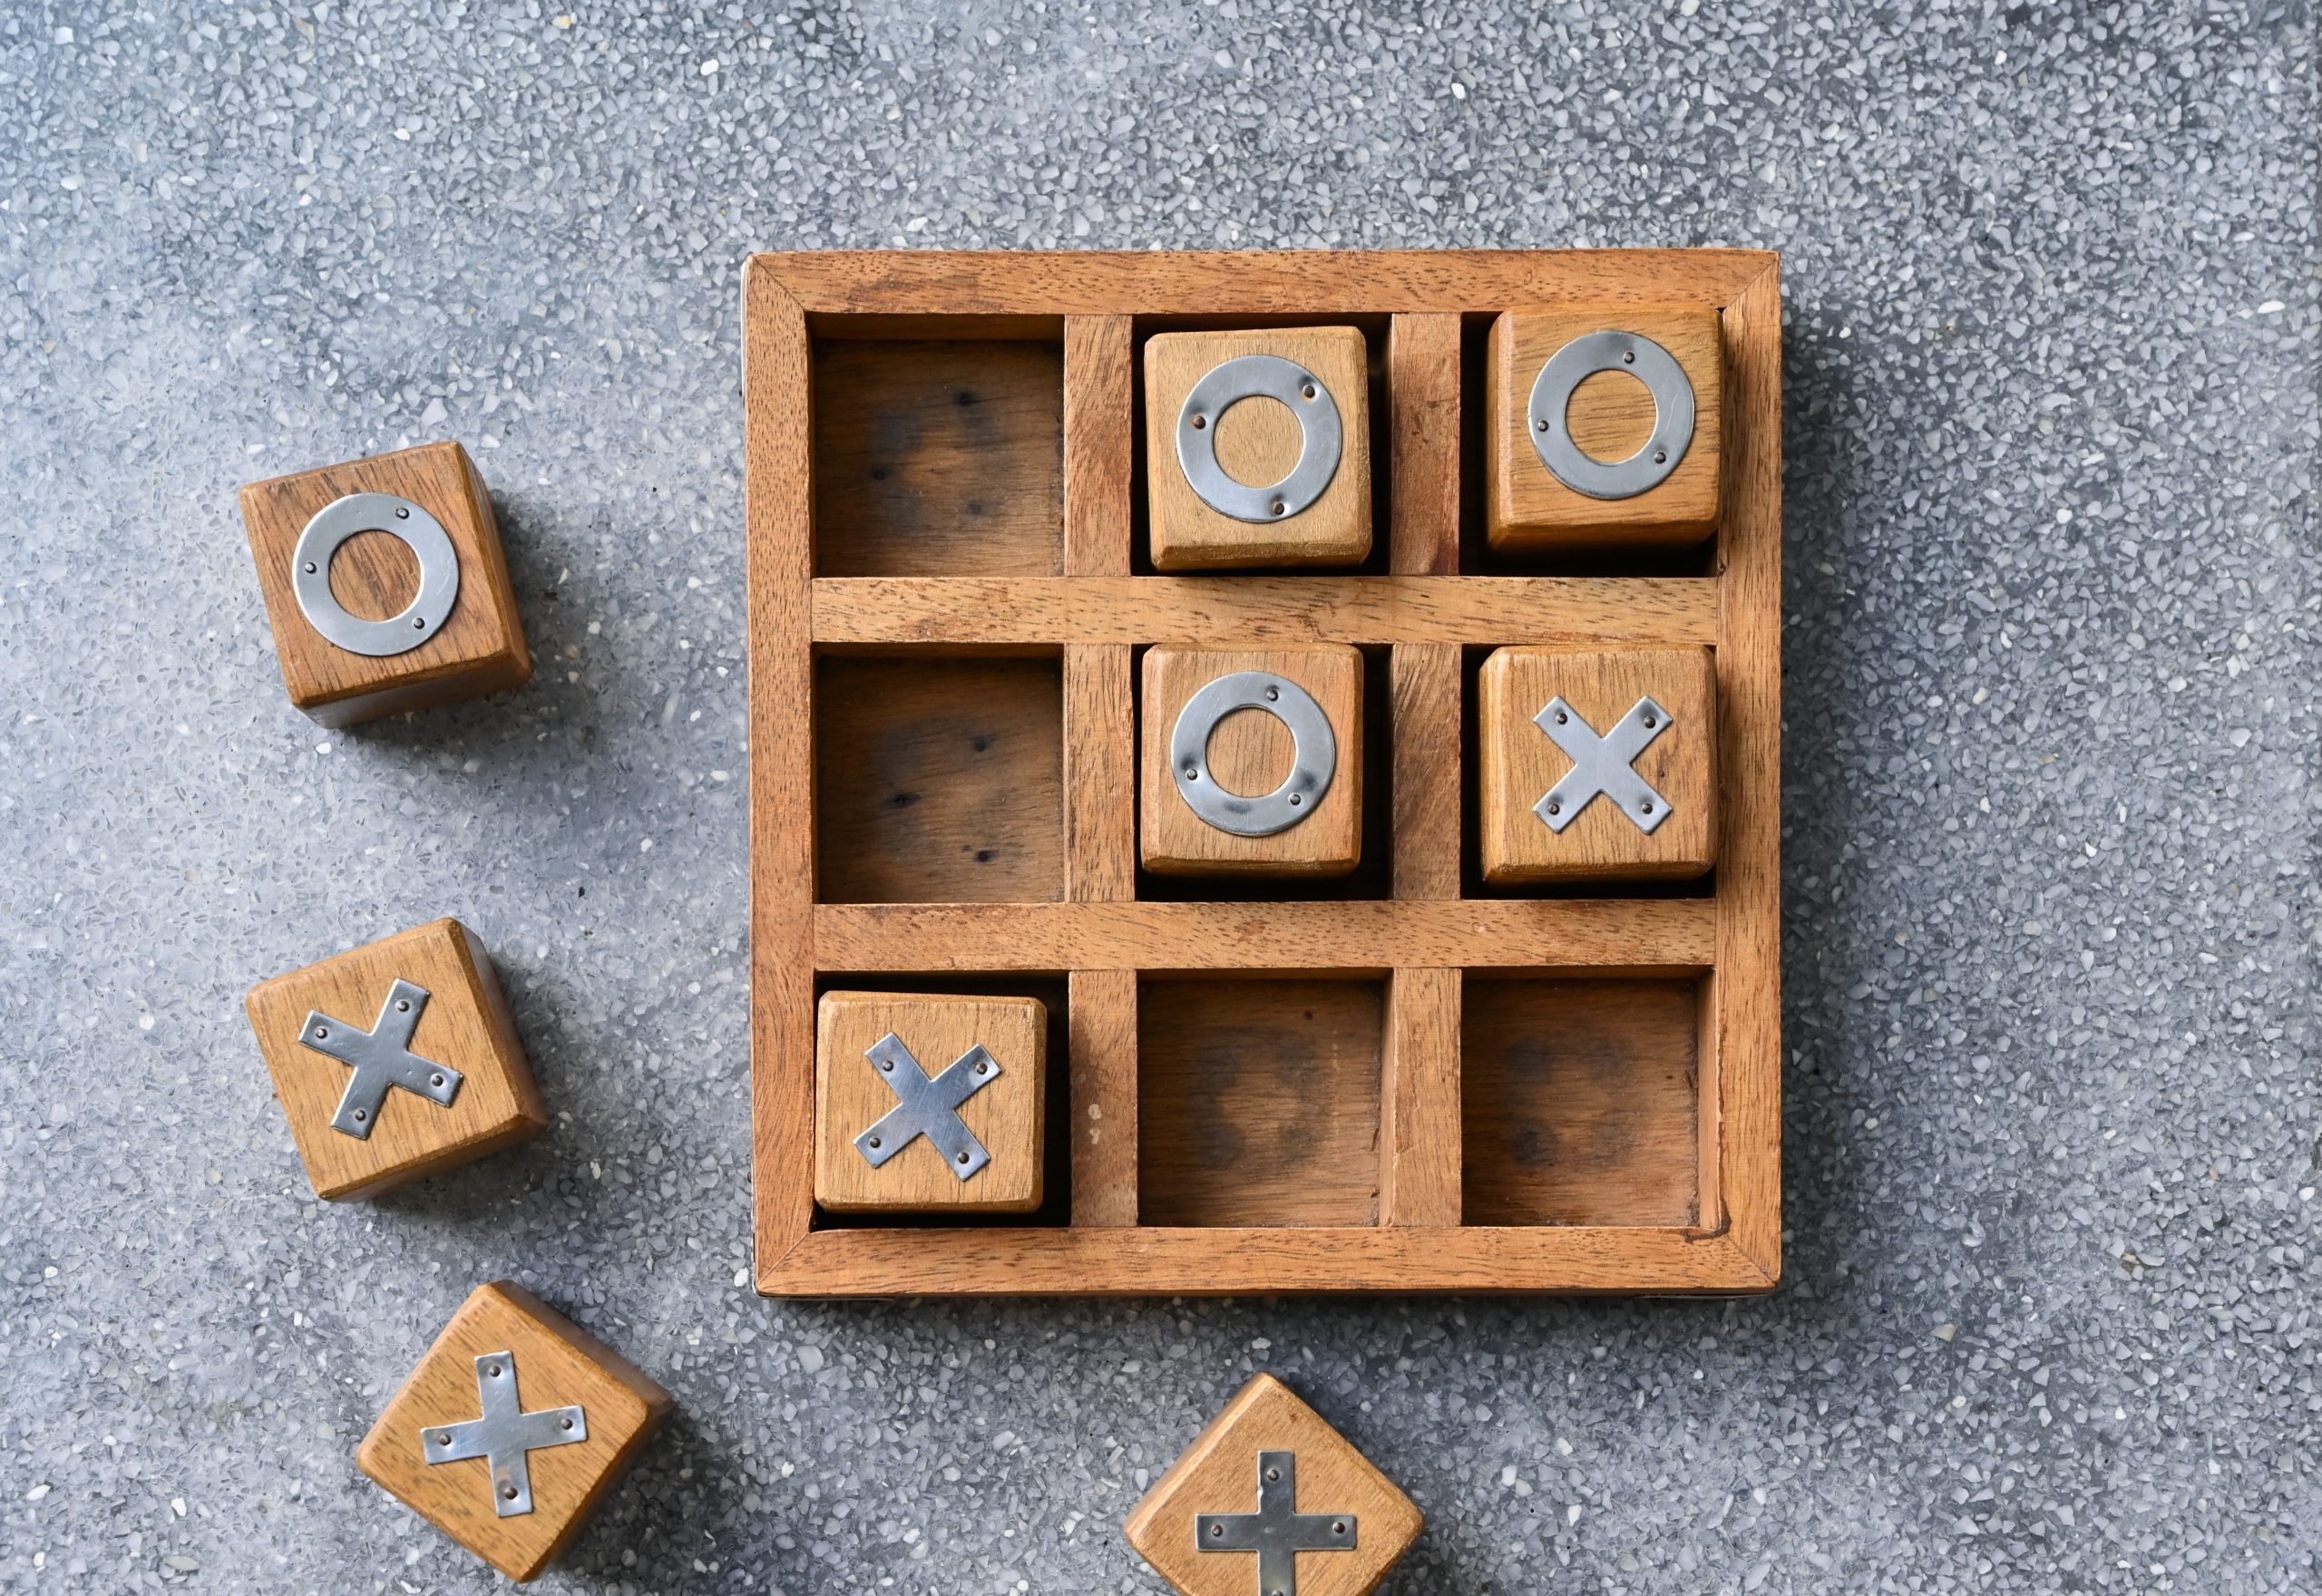 How does Tic-Tac-Toe Can Be Played?